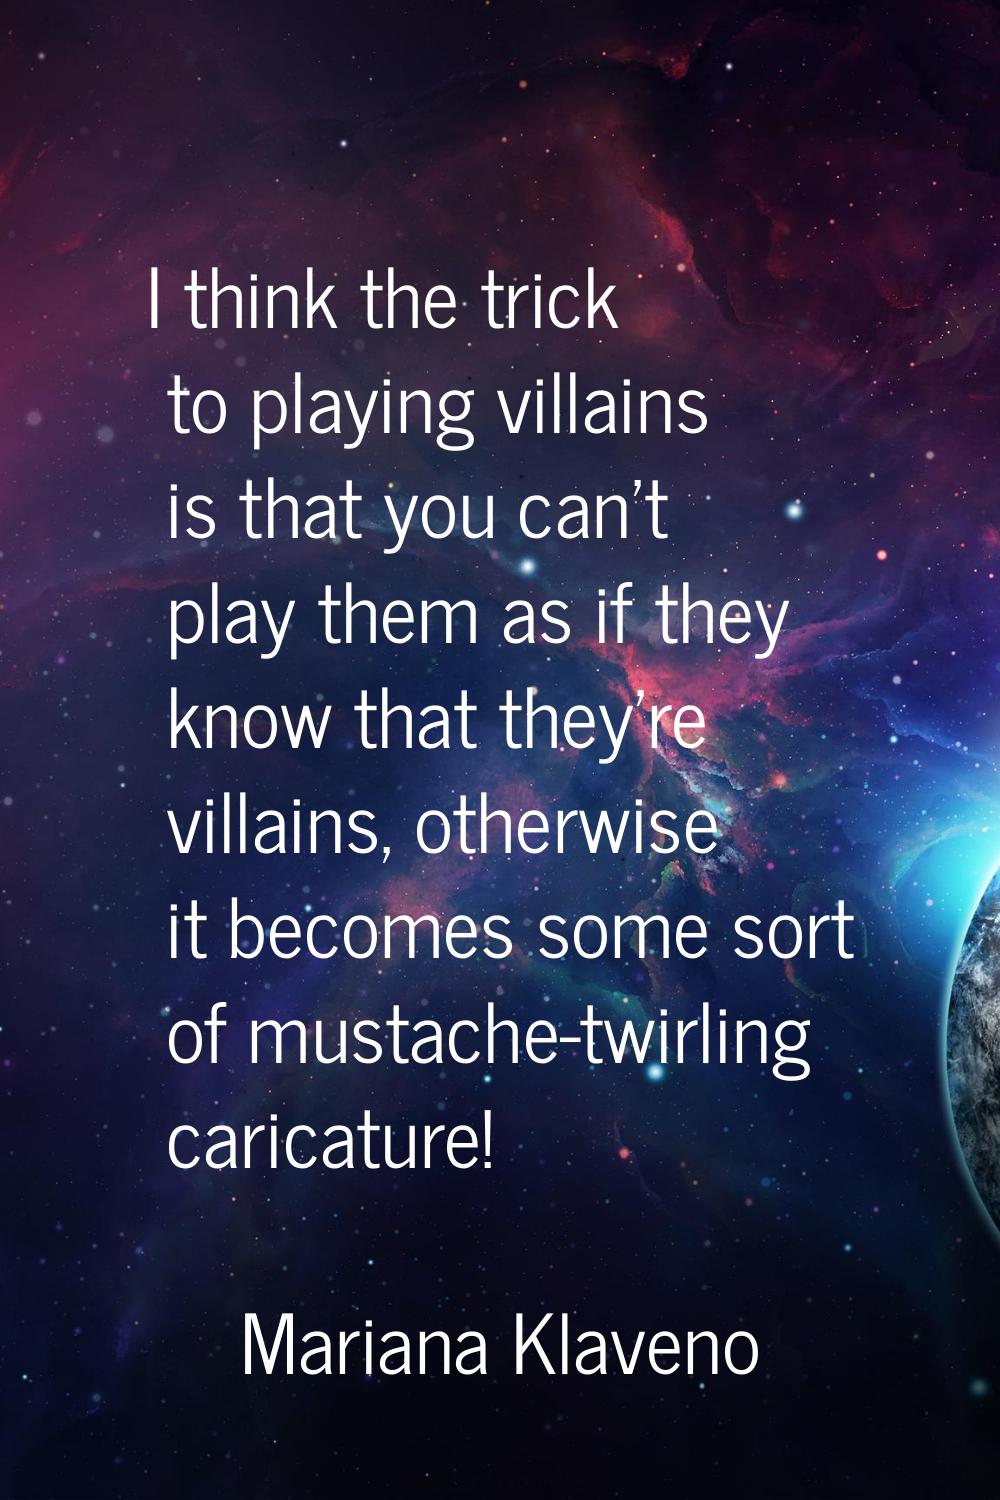 I think the trick to playing villains is that you can't play them as if they know that they're vill